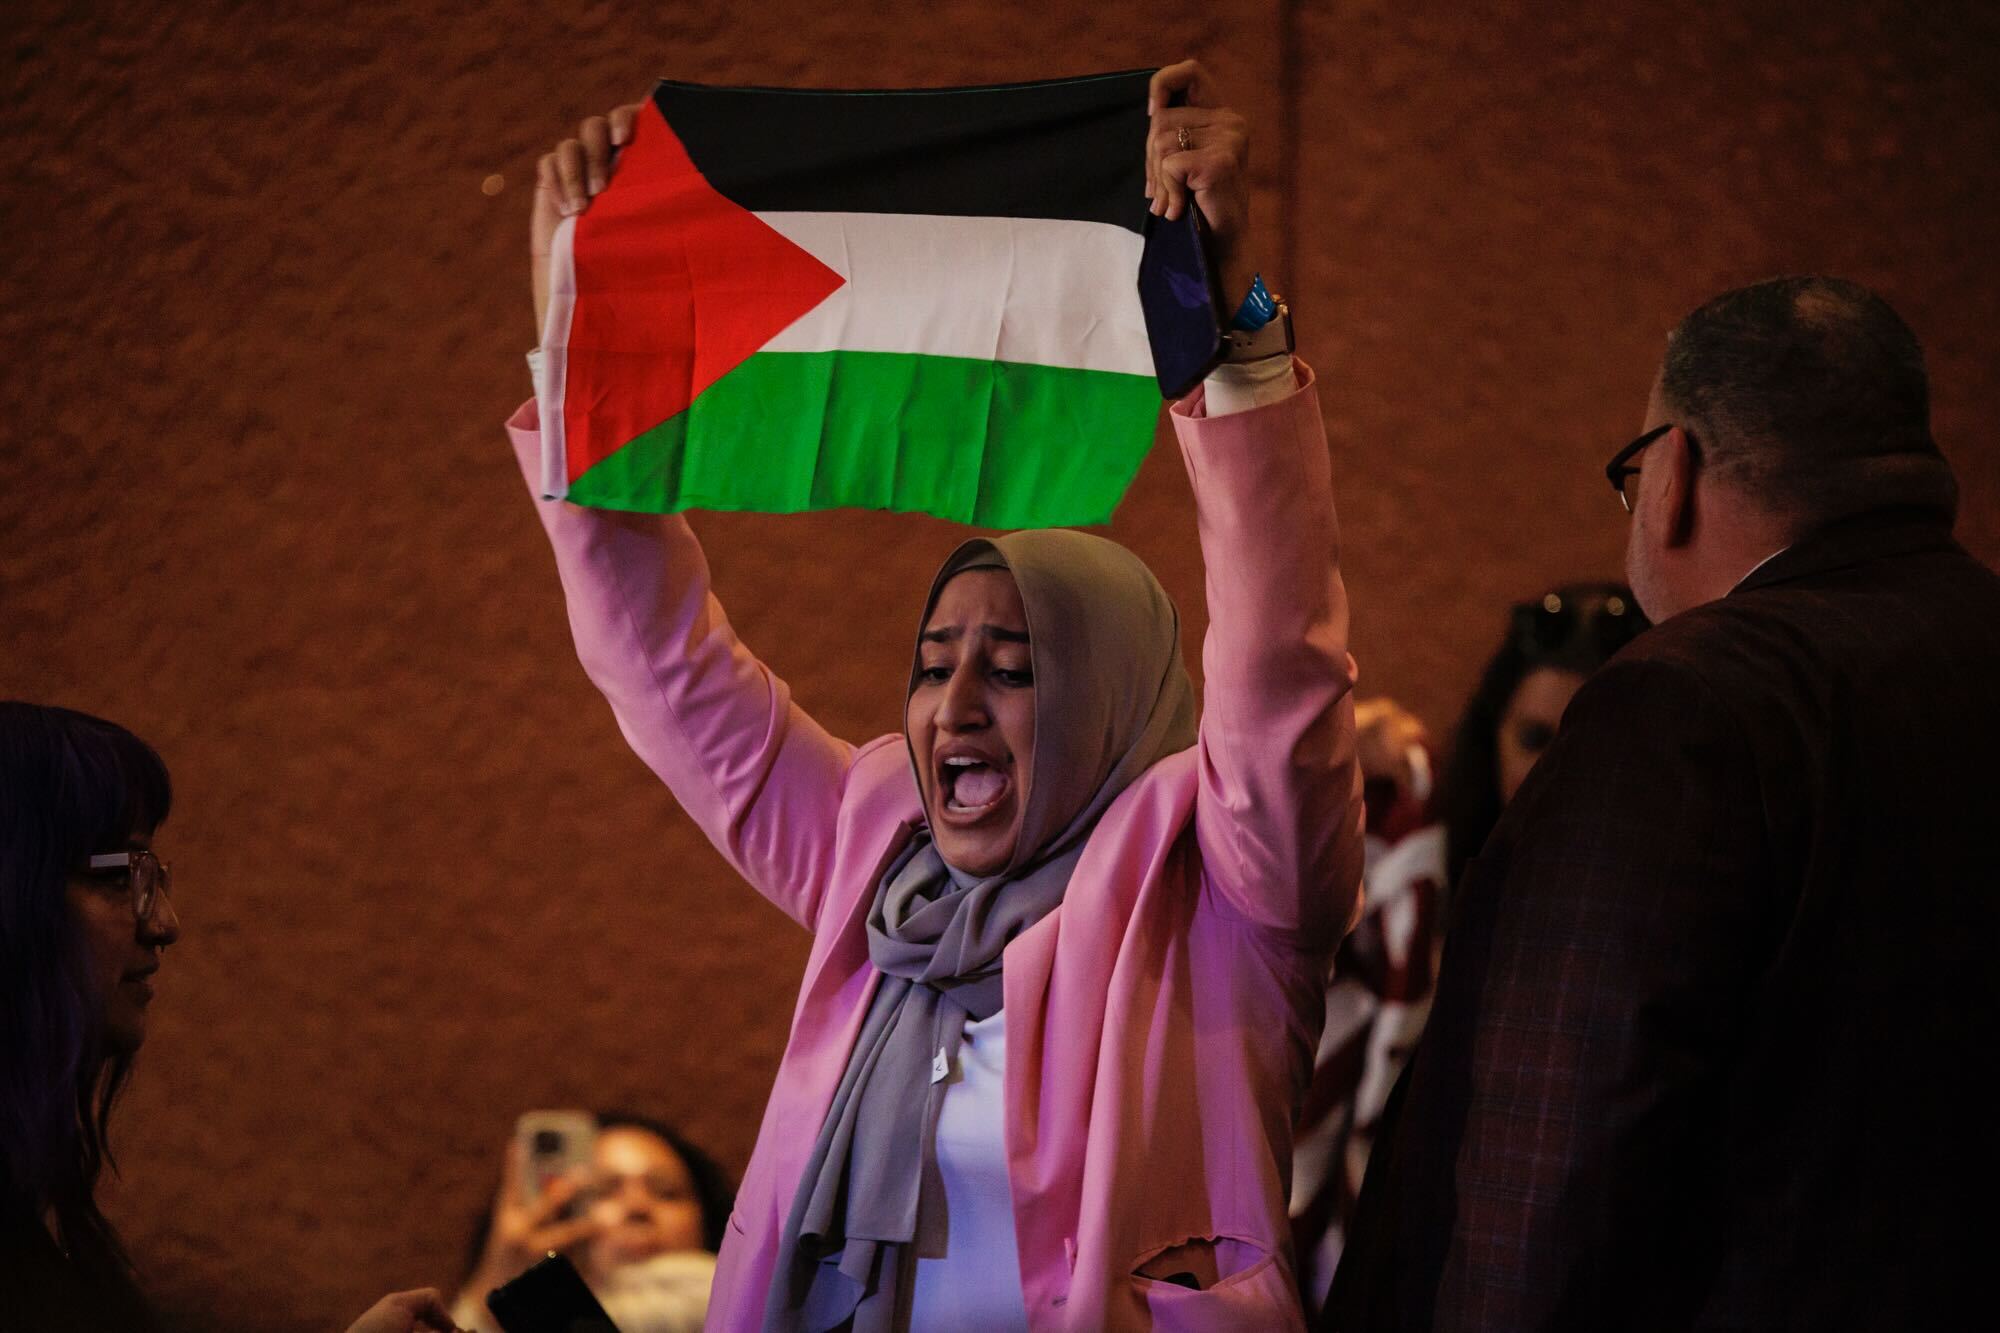 A protestor holds up a Palestinian flag in red, black, white and green colors inside an event where the Vice President was speaking in San Jose.